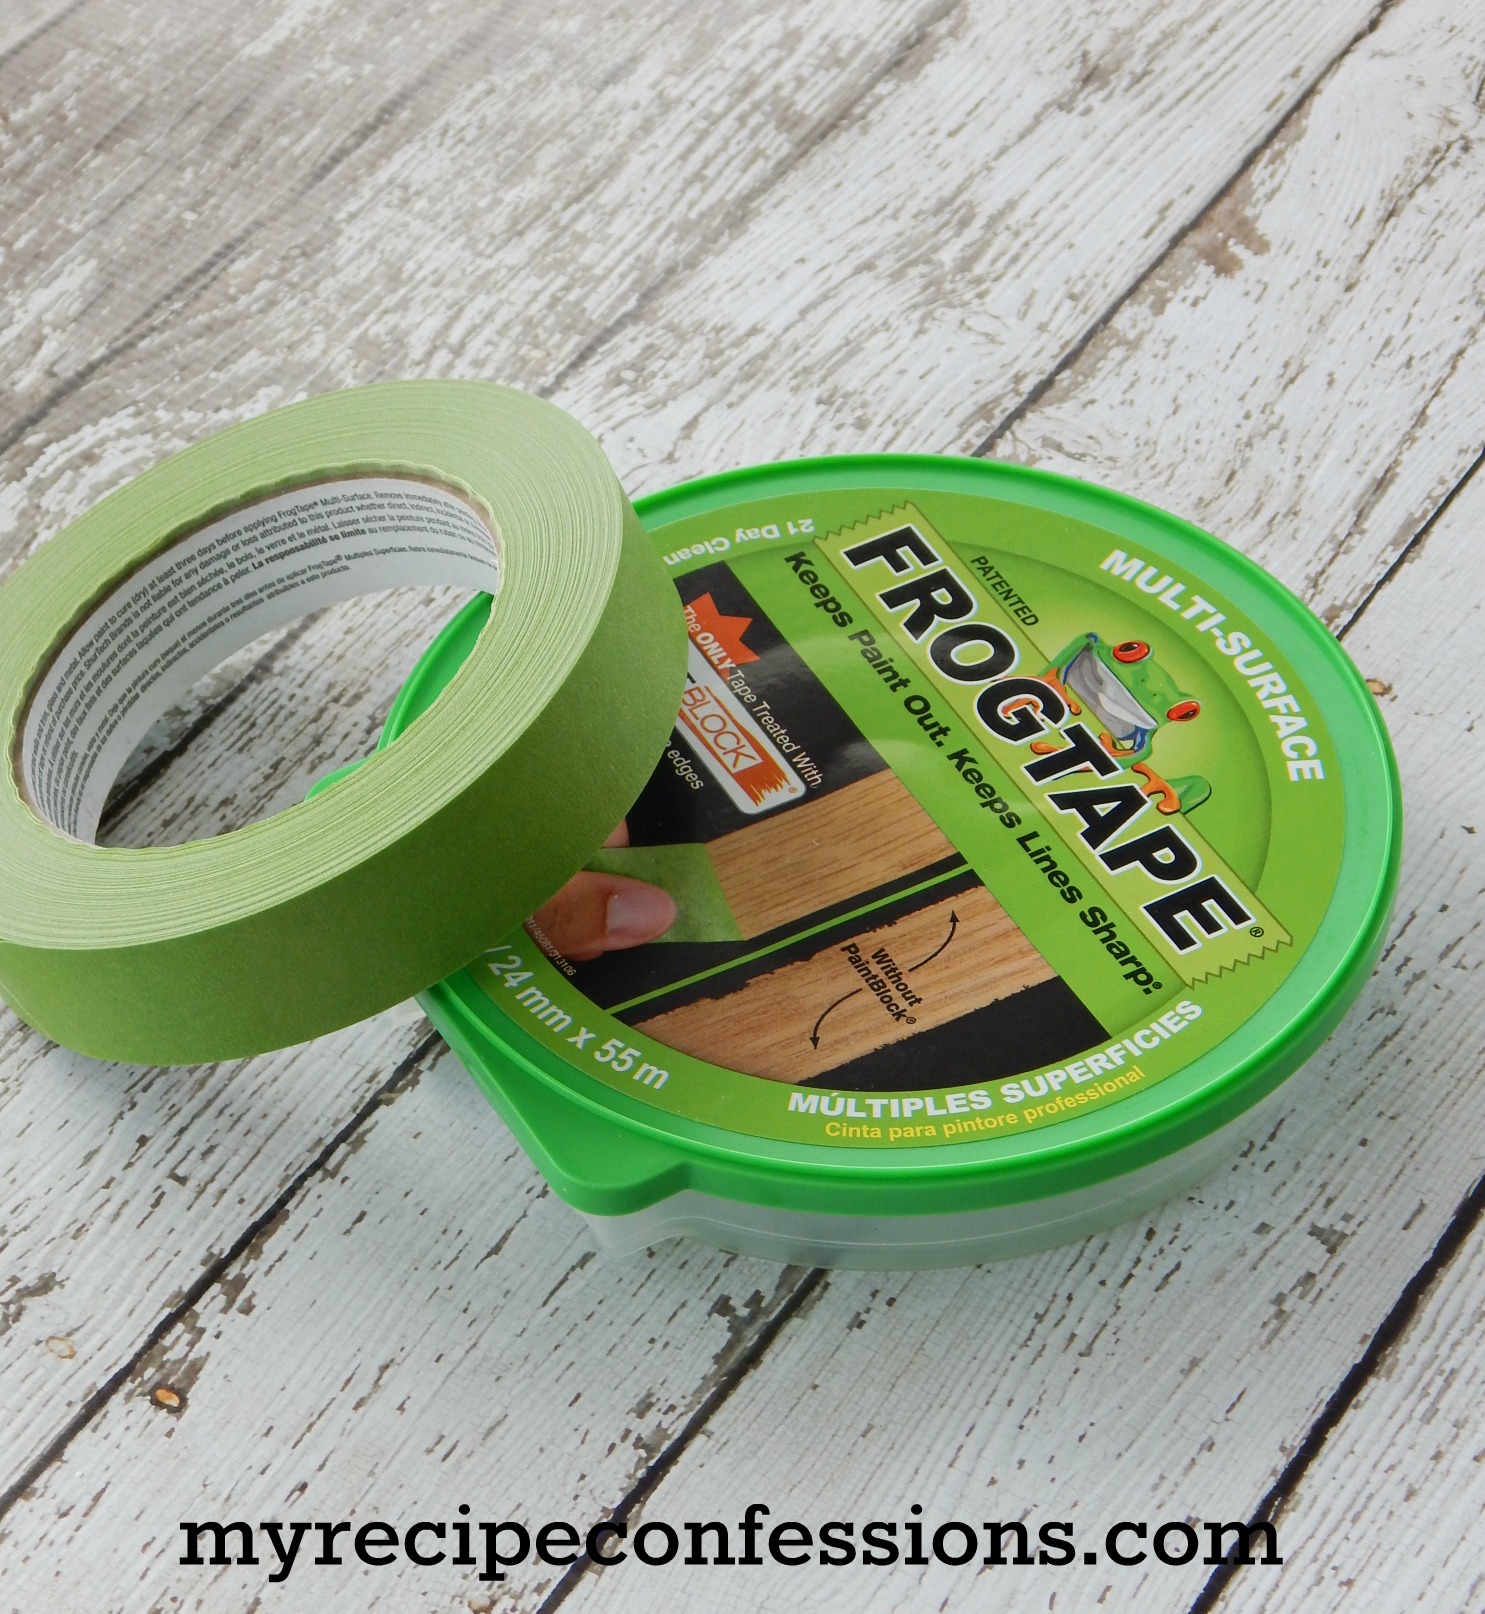 Frog Tape